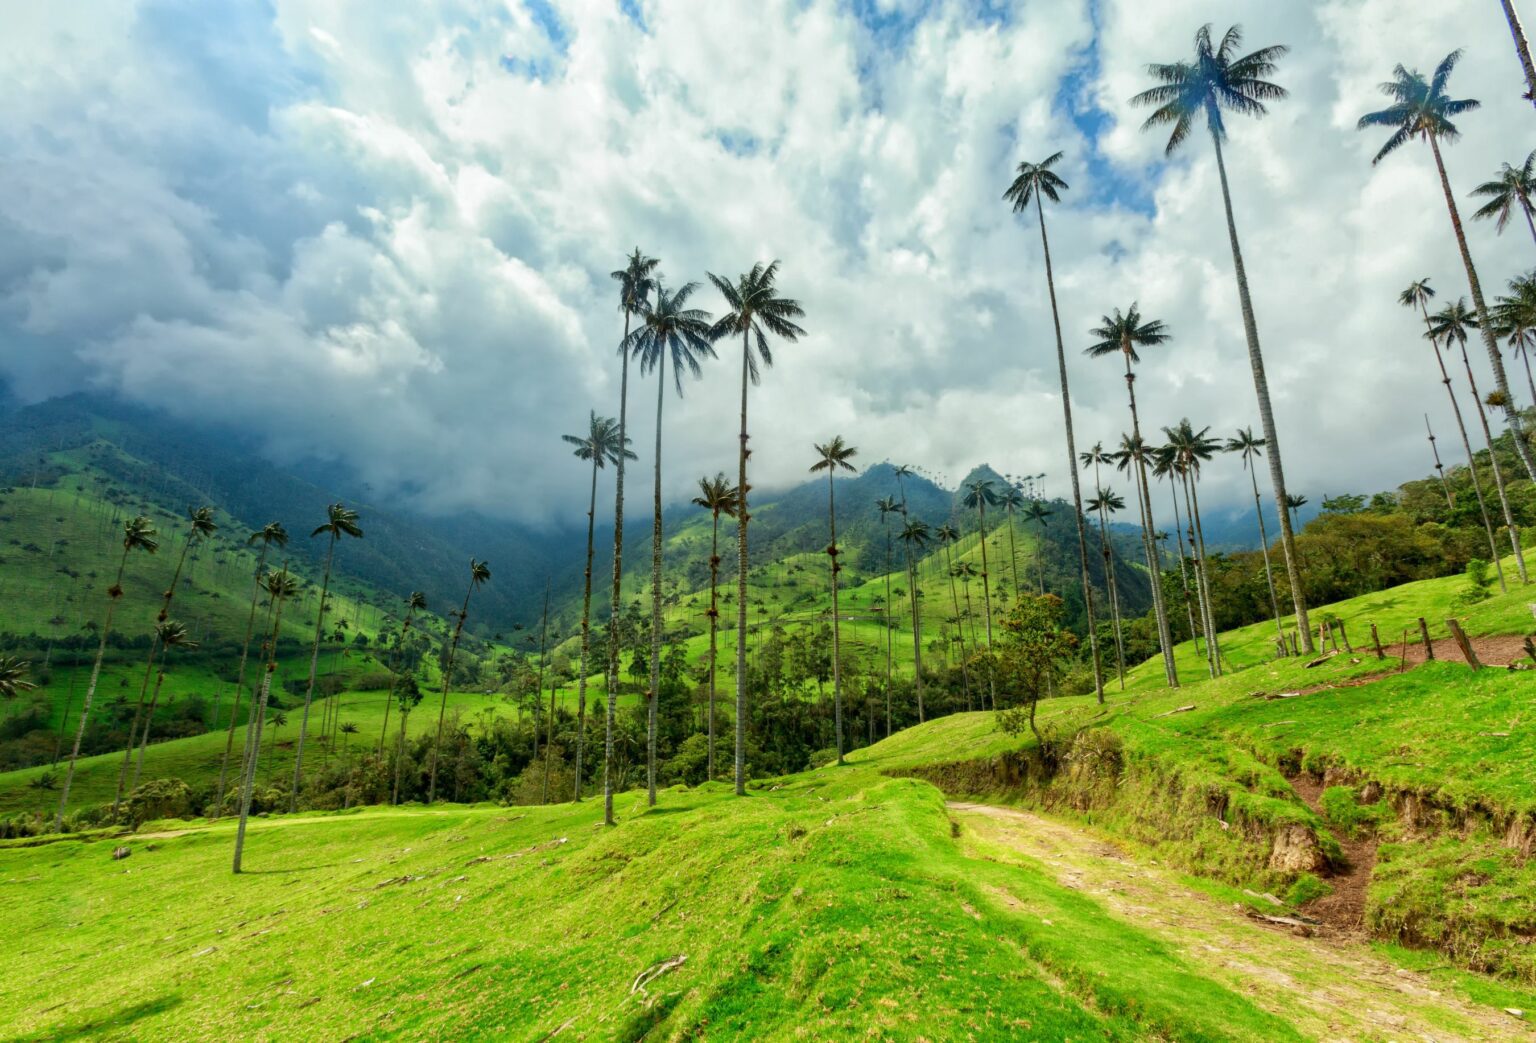 a lush green hillside covered in palm trees.